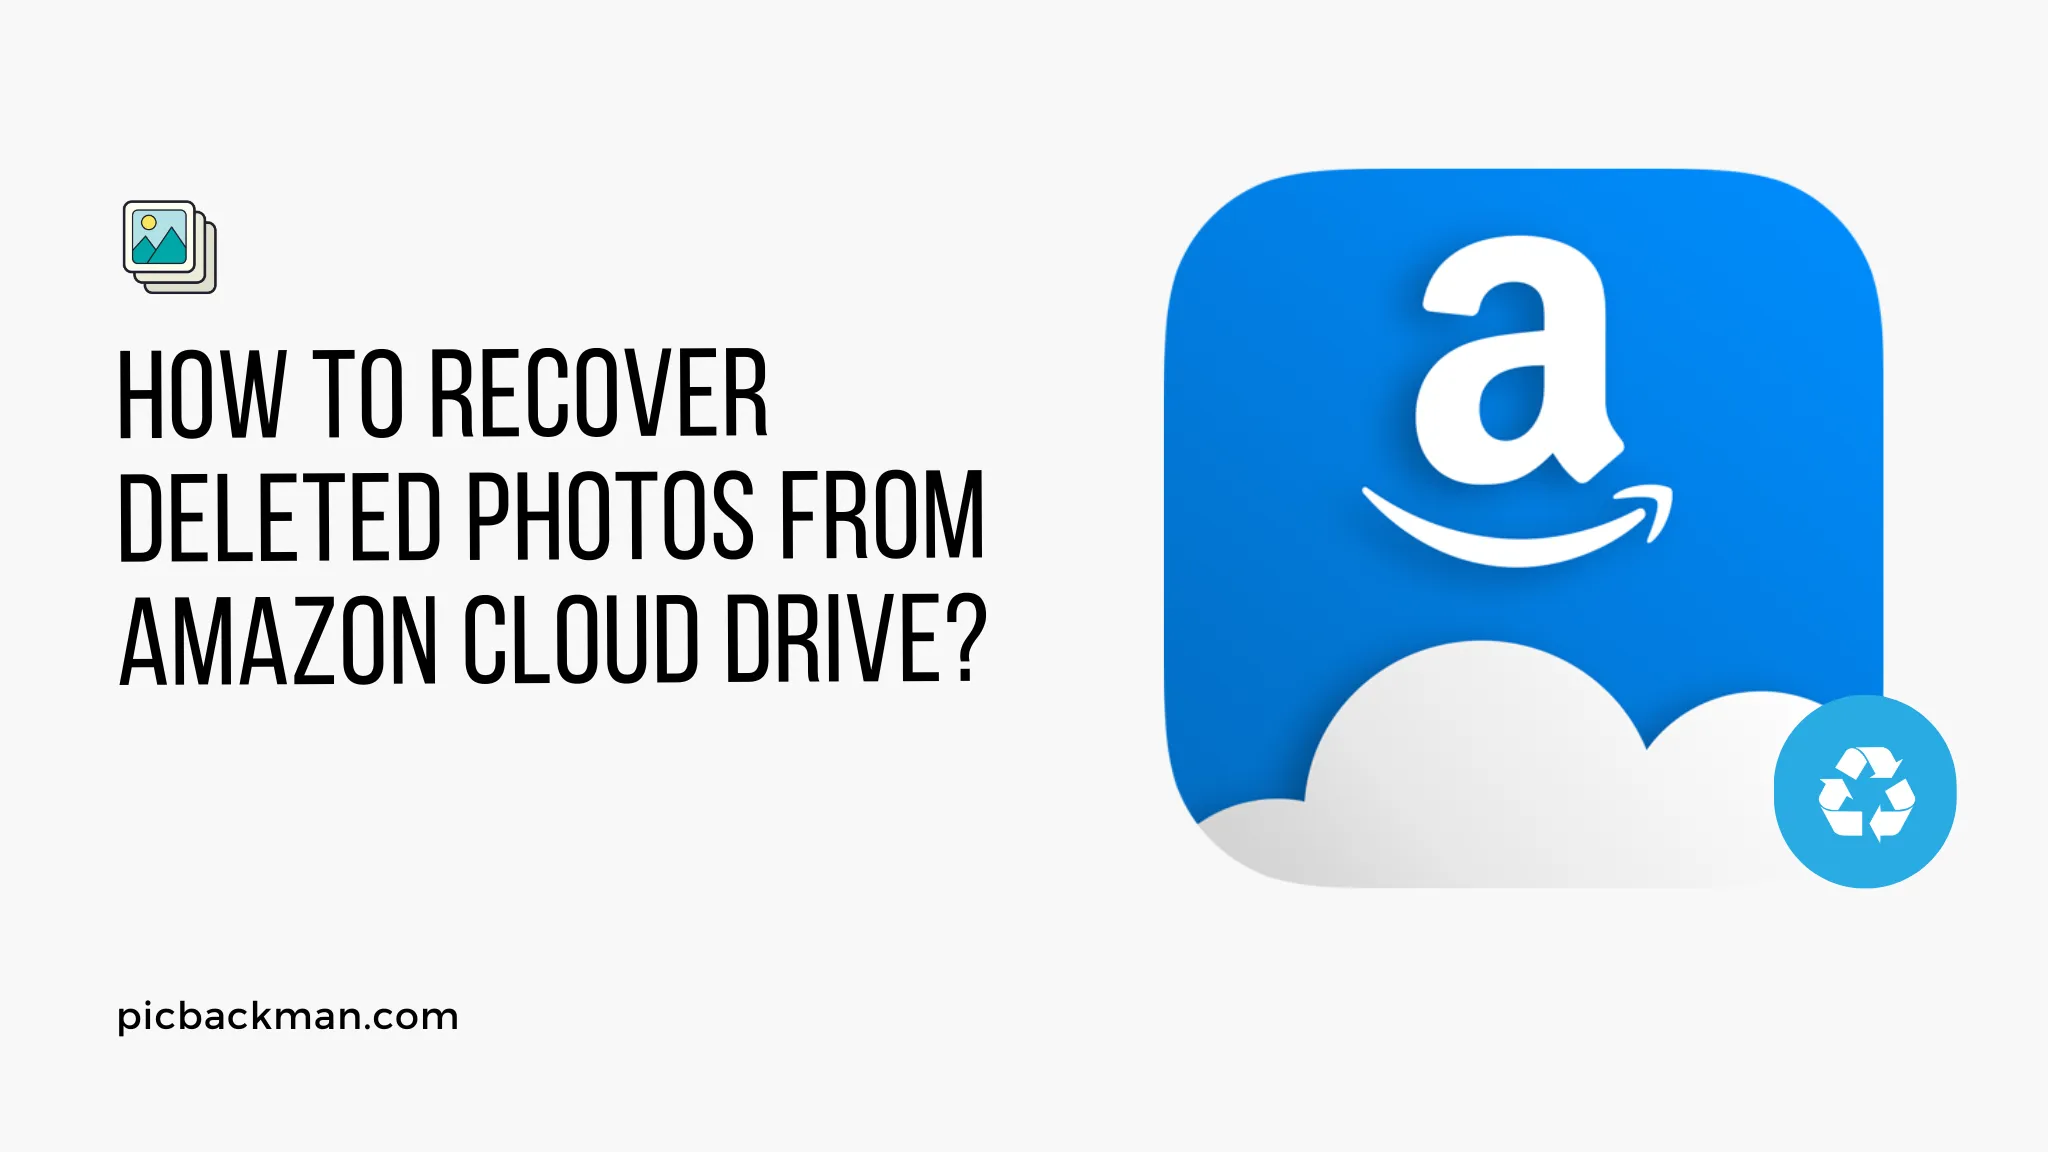 How to Recover Deleted Photos from Amazon Cloud Drive